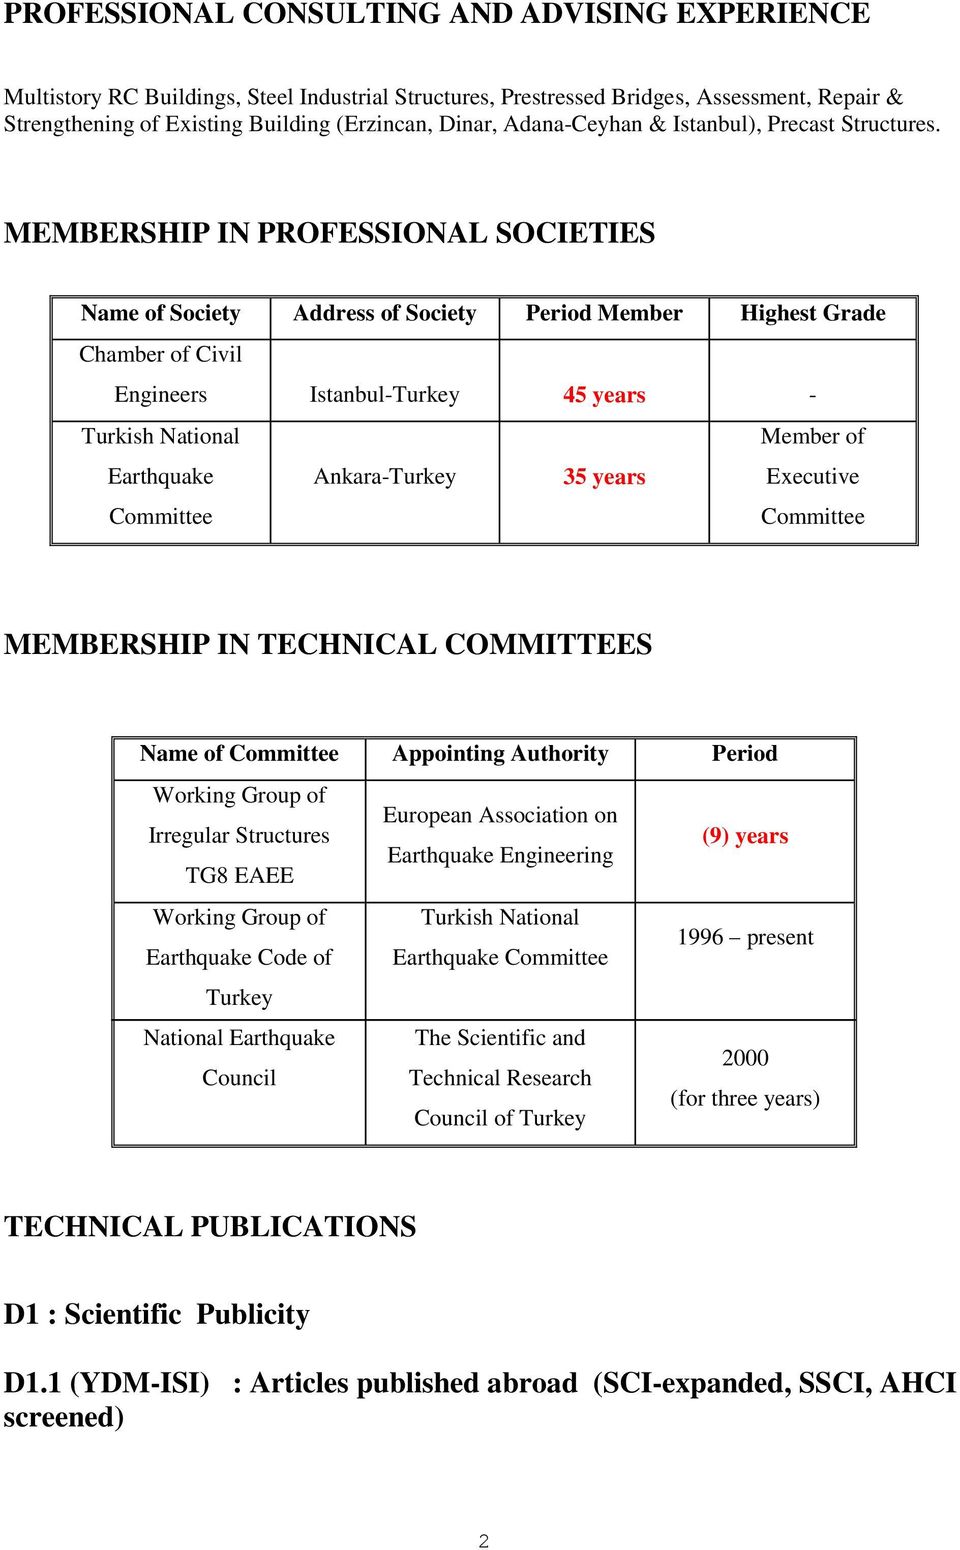 MEMBERSHIP IN PROFESSIONAL SOCIETIES Name of Society Address of Society Period Member Highest Grade Chamber of Civil Engineers Istanbul-Turkey 45 years - Turkish National Earthquake Committee